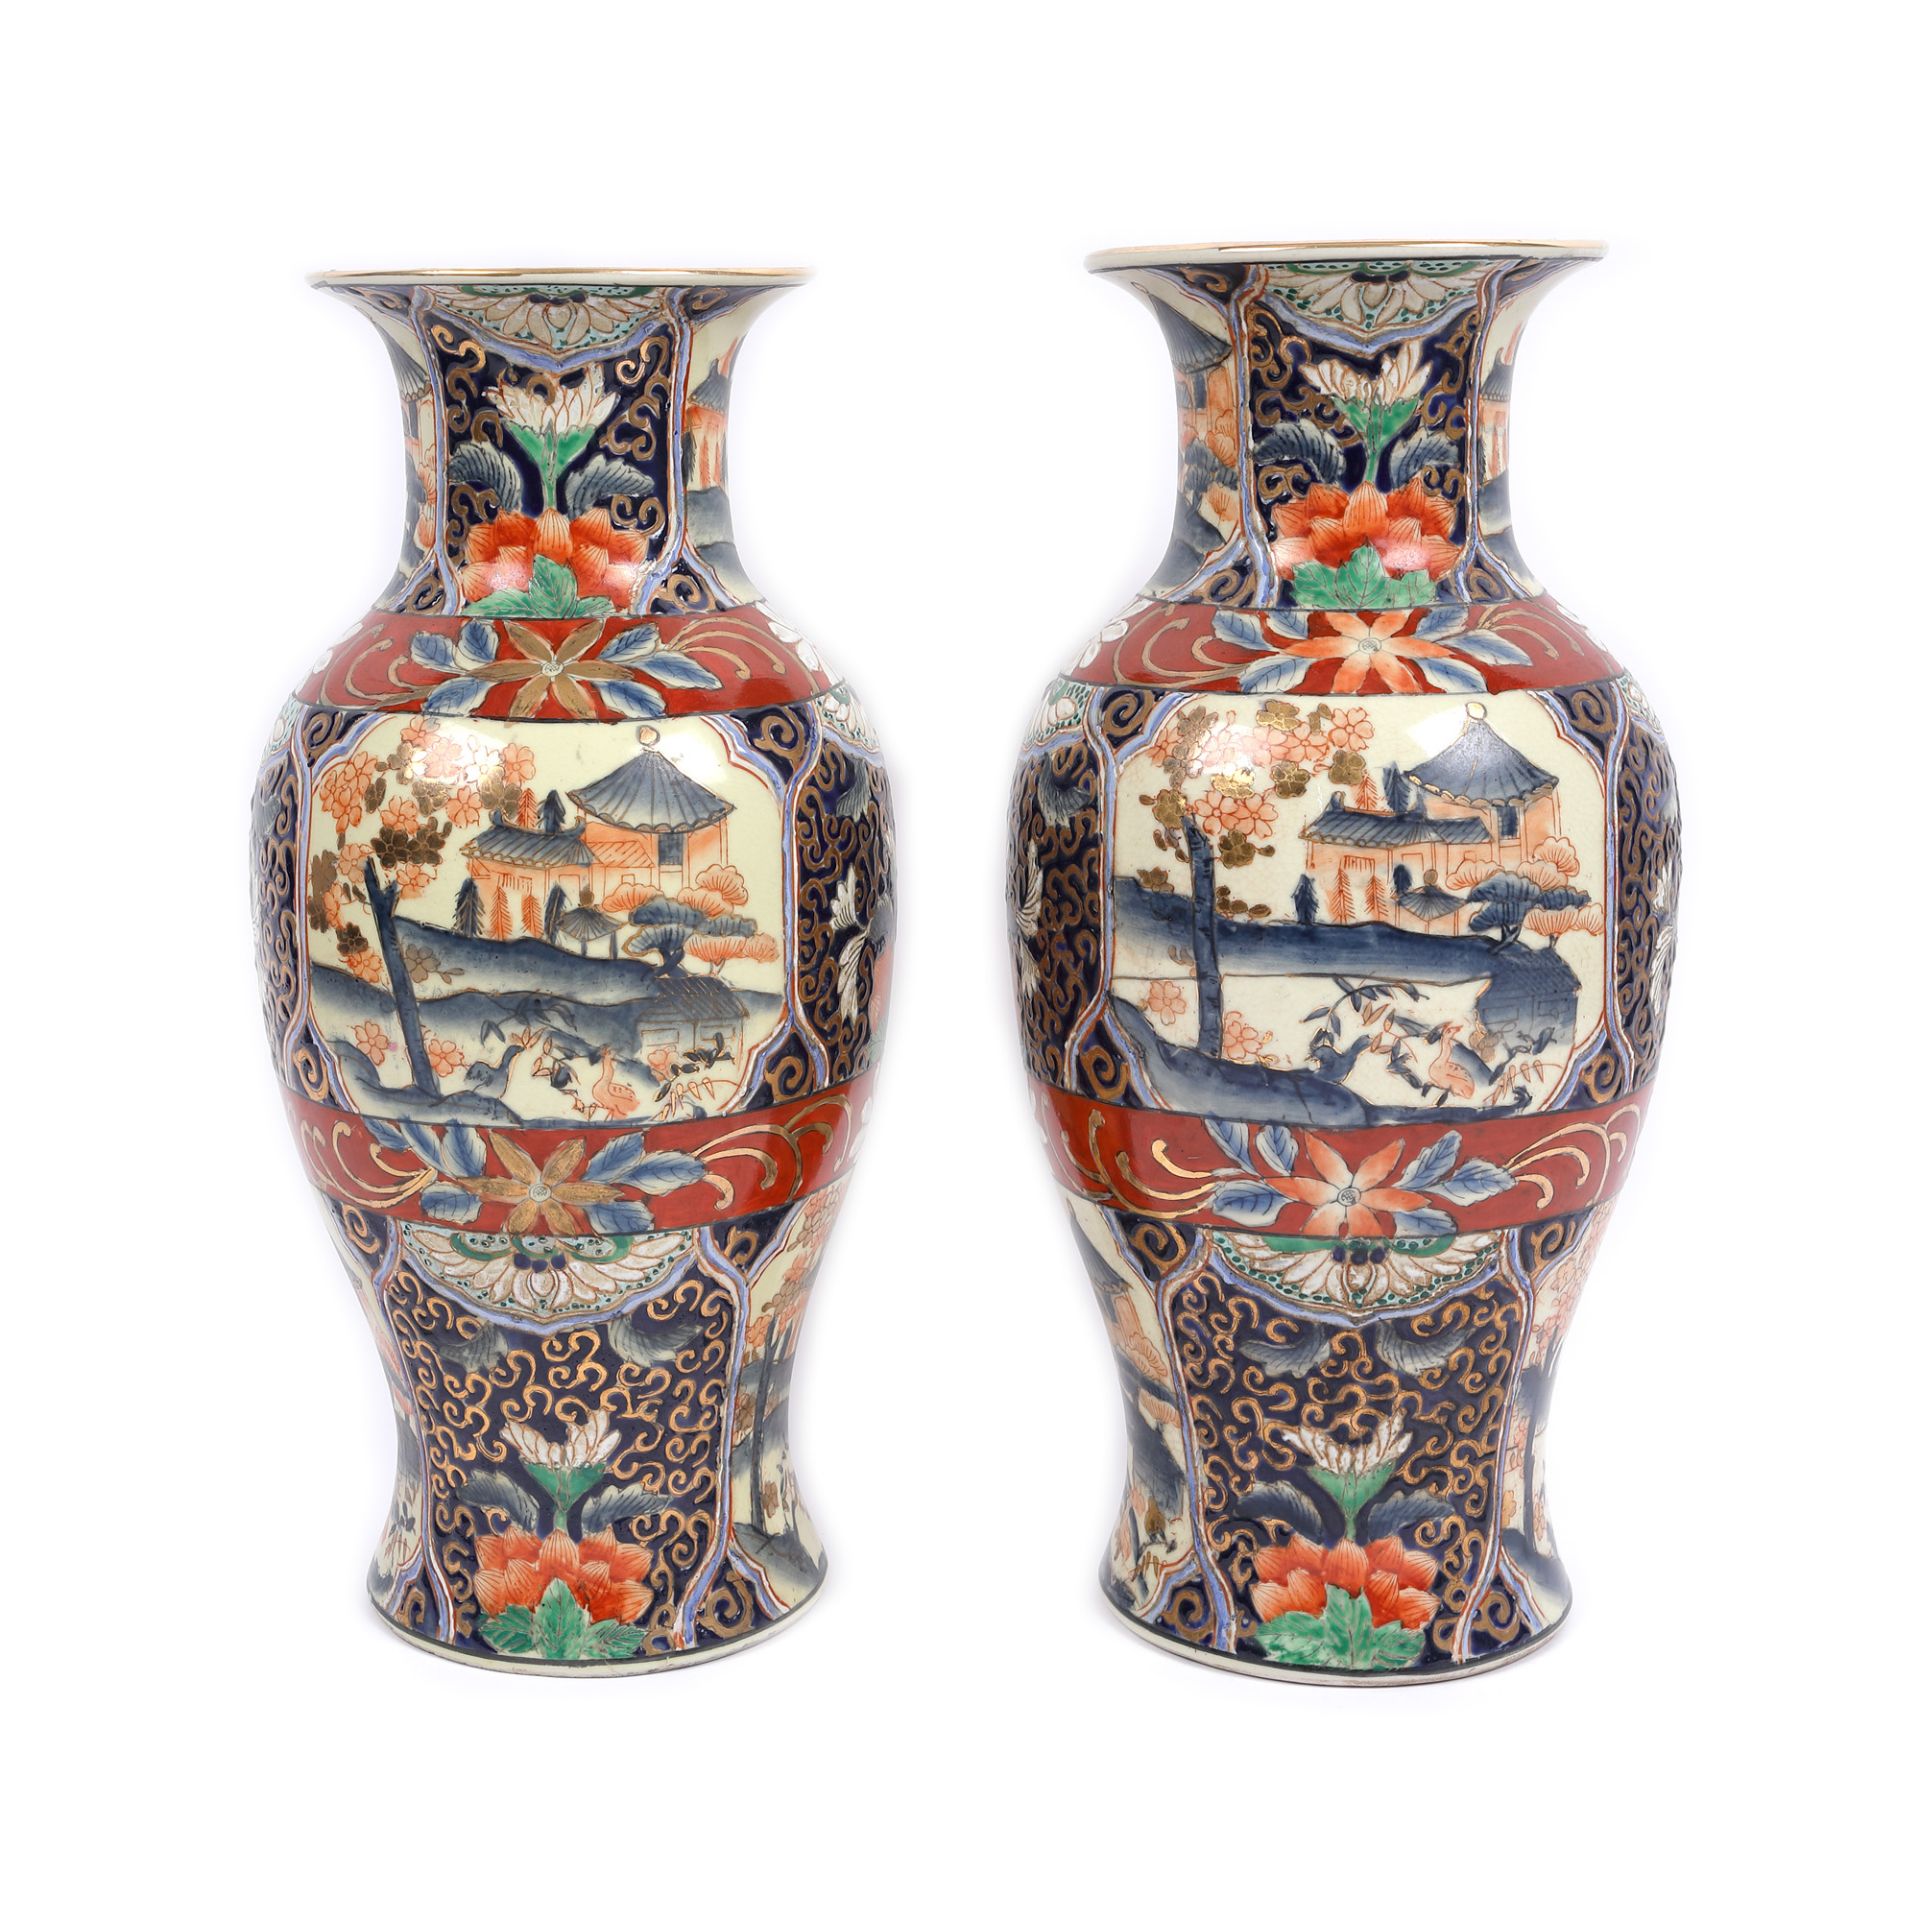 Pair of porcelain vessels, retrospective Qianlong mark, first half of the 20th century